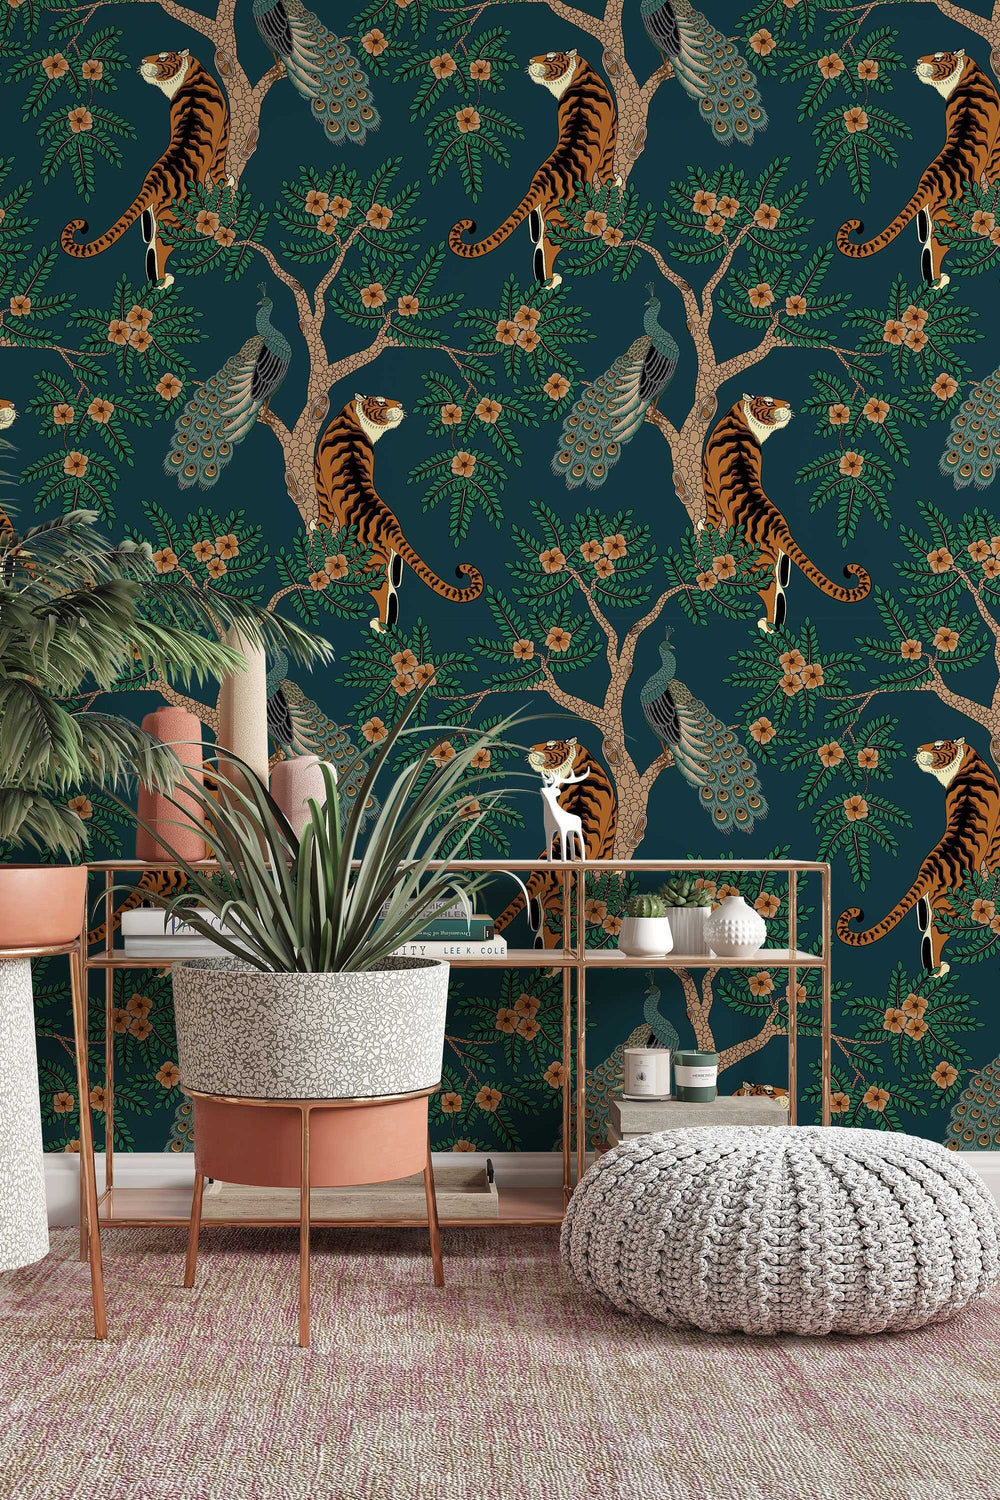 Tiger and Peacock in the woods on the deep green background - Peel & Stick Wallpaper - Removable Self Adhesive 3252